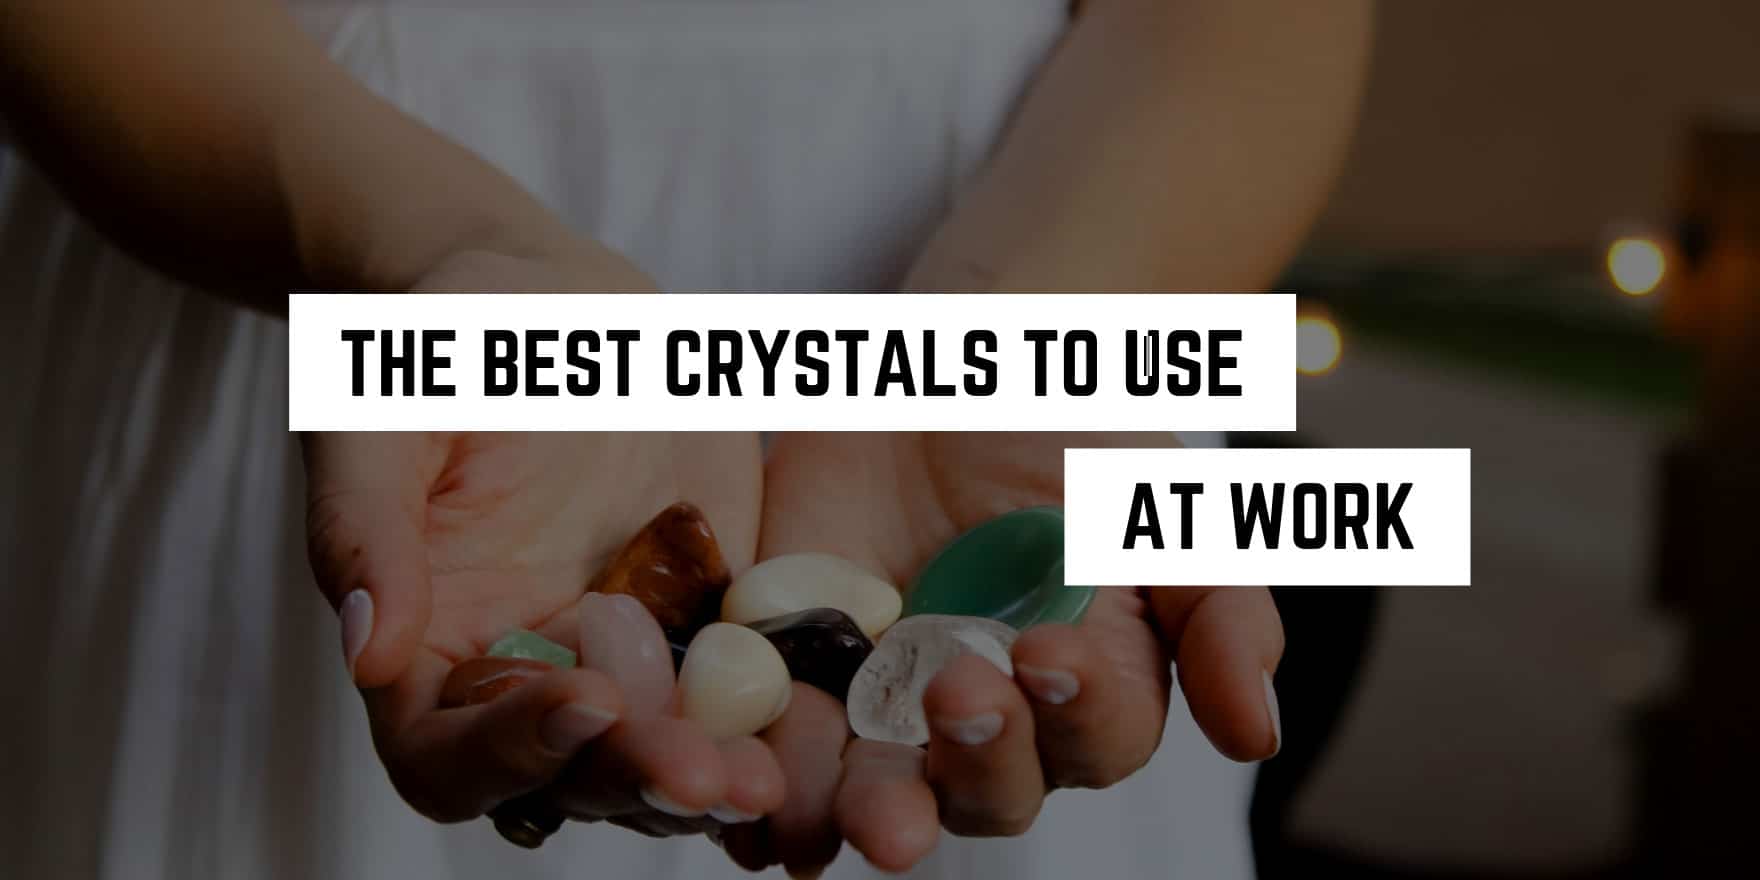 Enhancing workplace positivity: discover the top crystals for your office environment from a metaphysical shop.